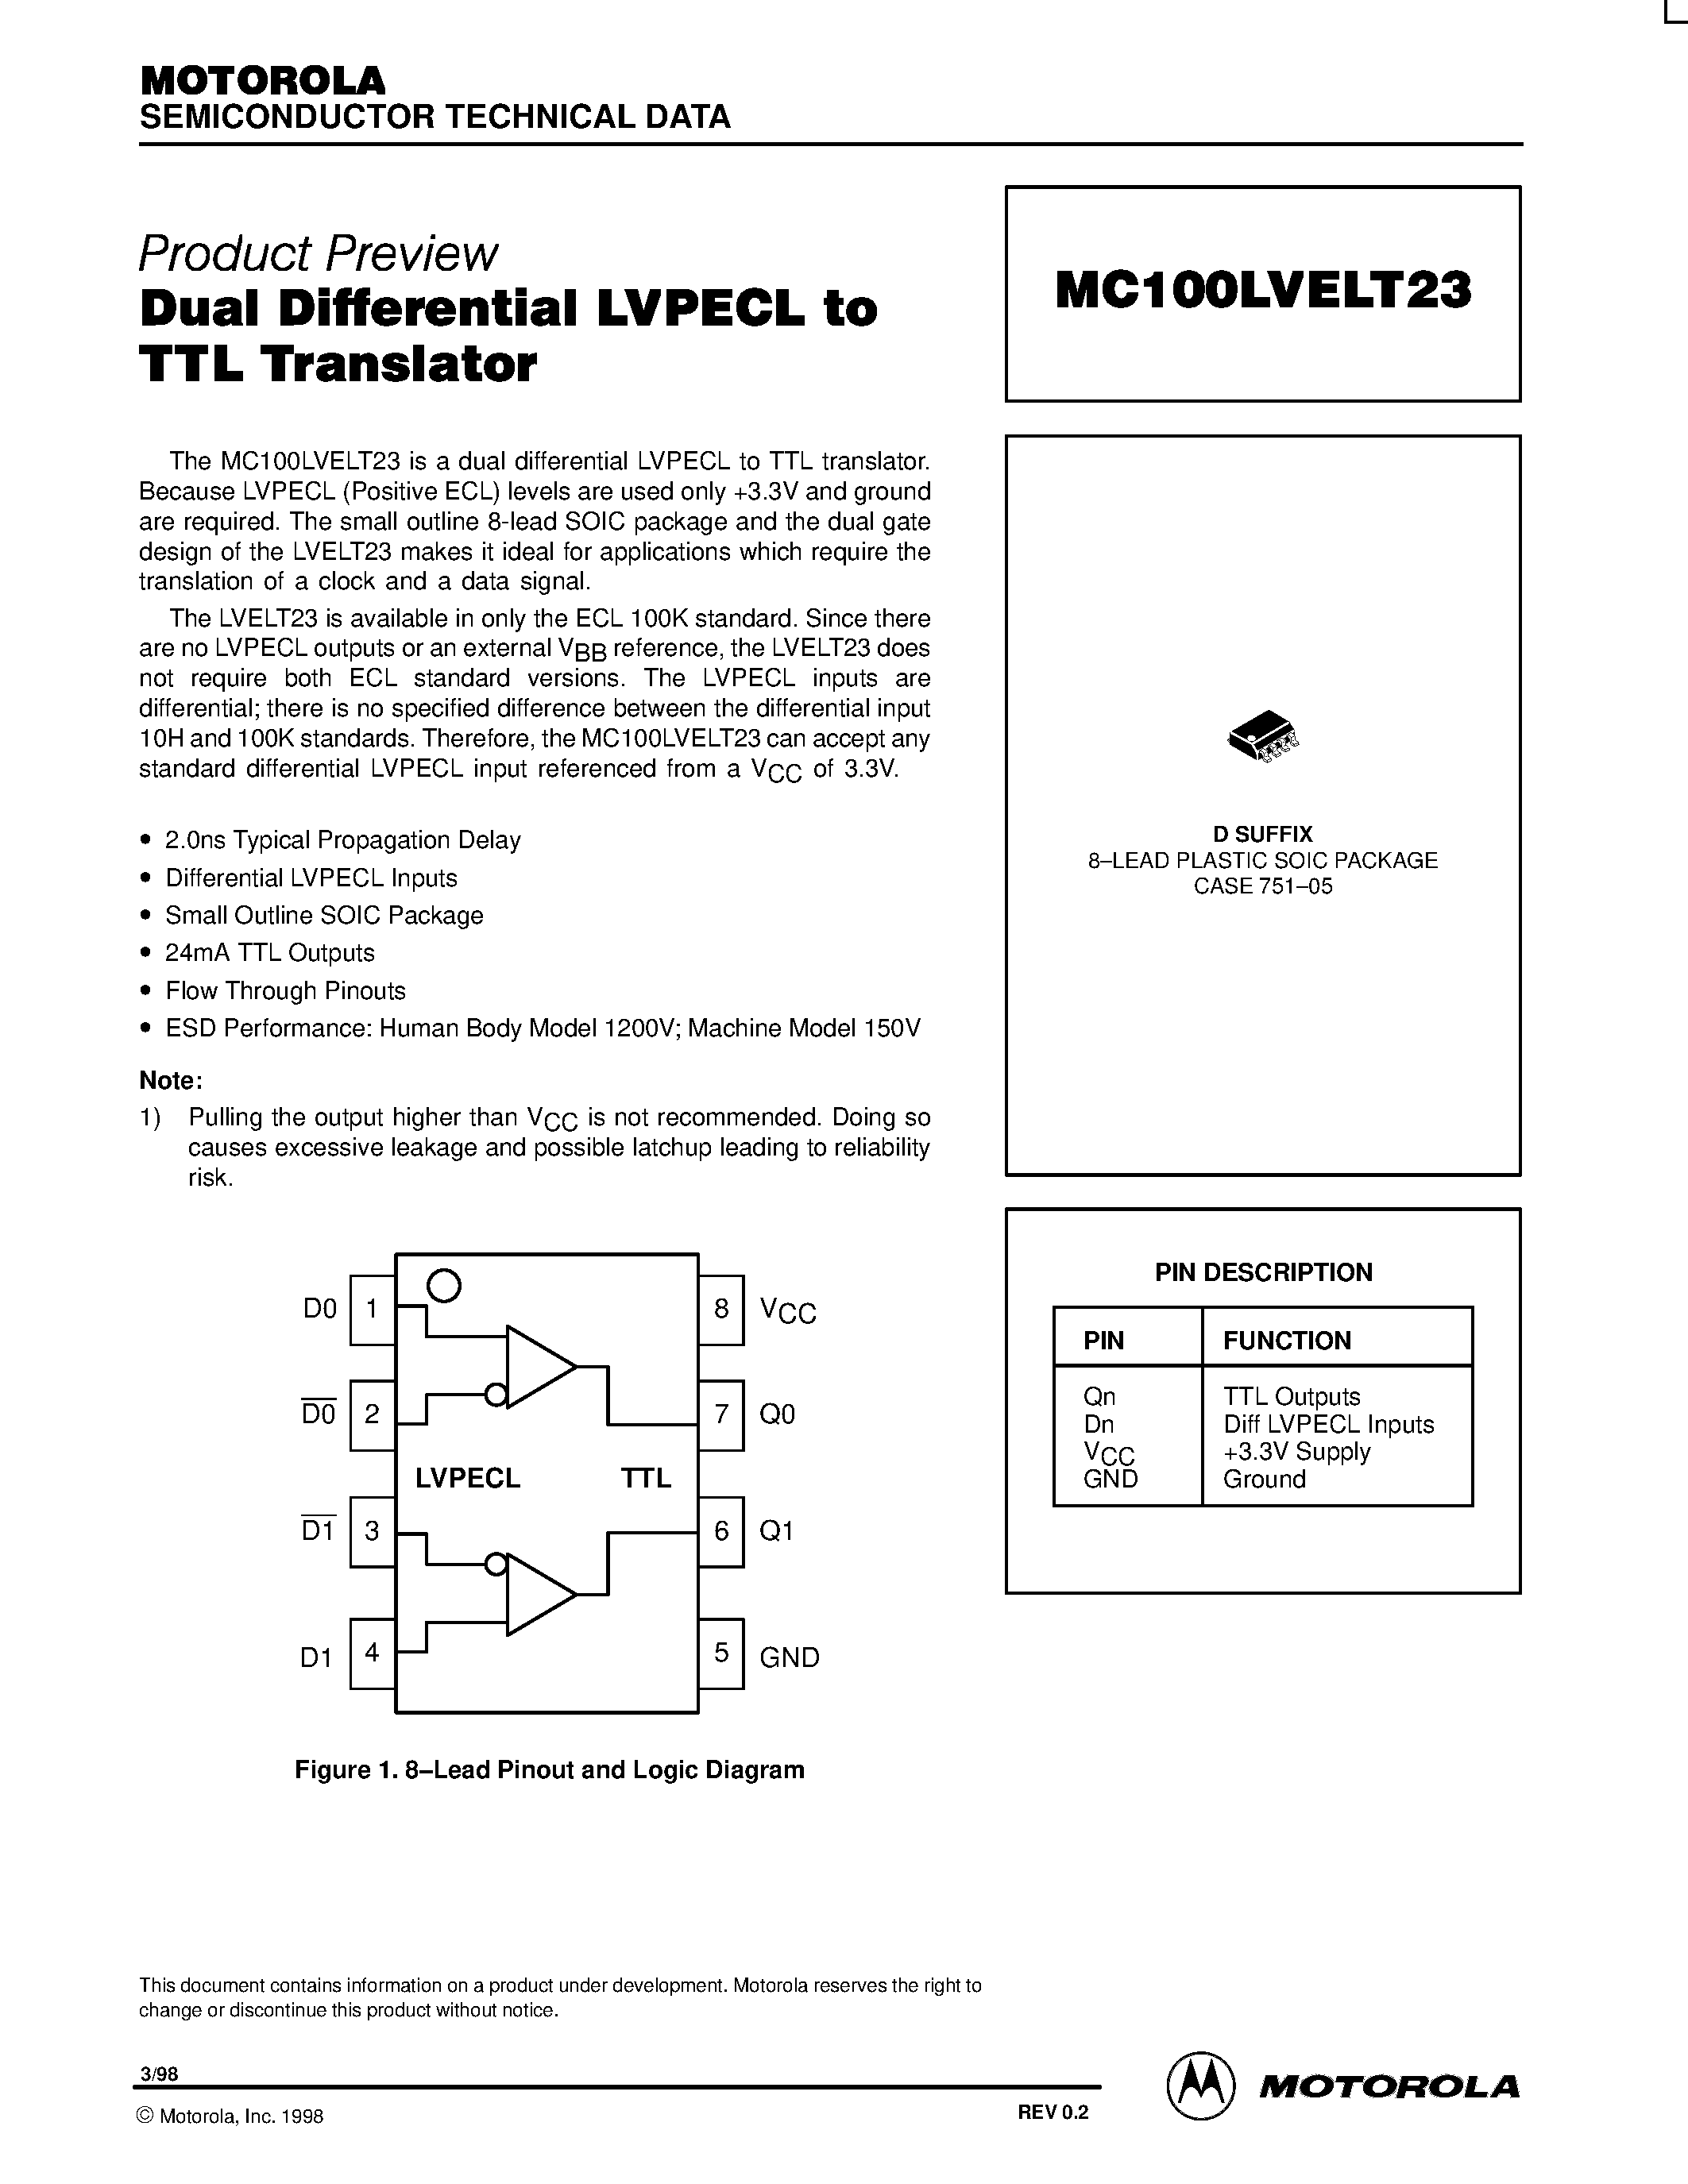 Datasheet MC10LVELT23D - Dual Differential LVPECL to TTL Translator page 1